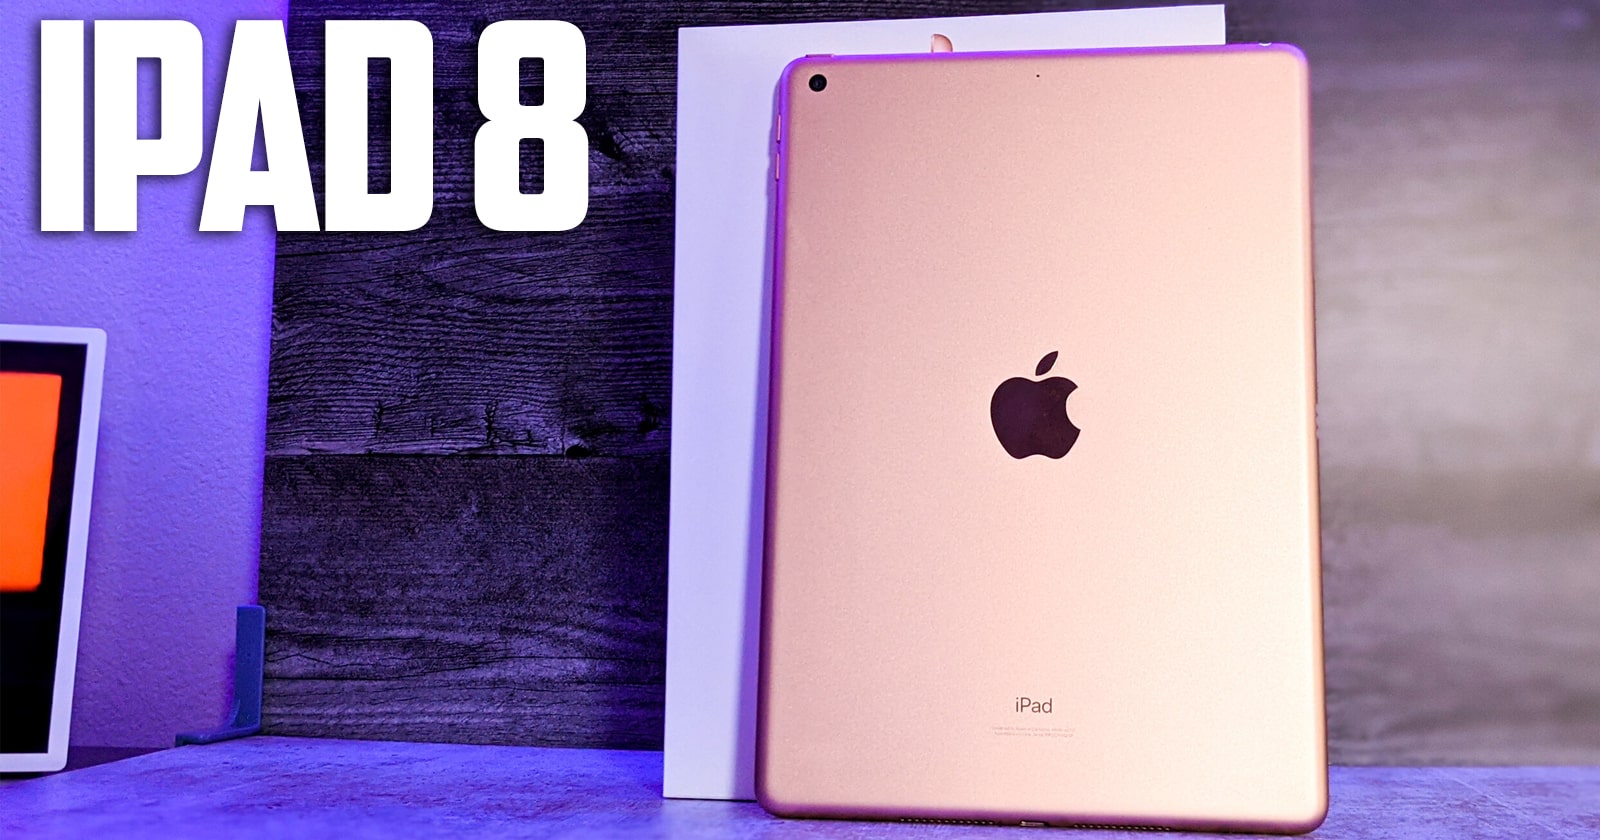 What Is the Difference Between iPad 8 and iPad Air?